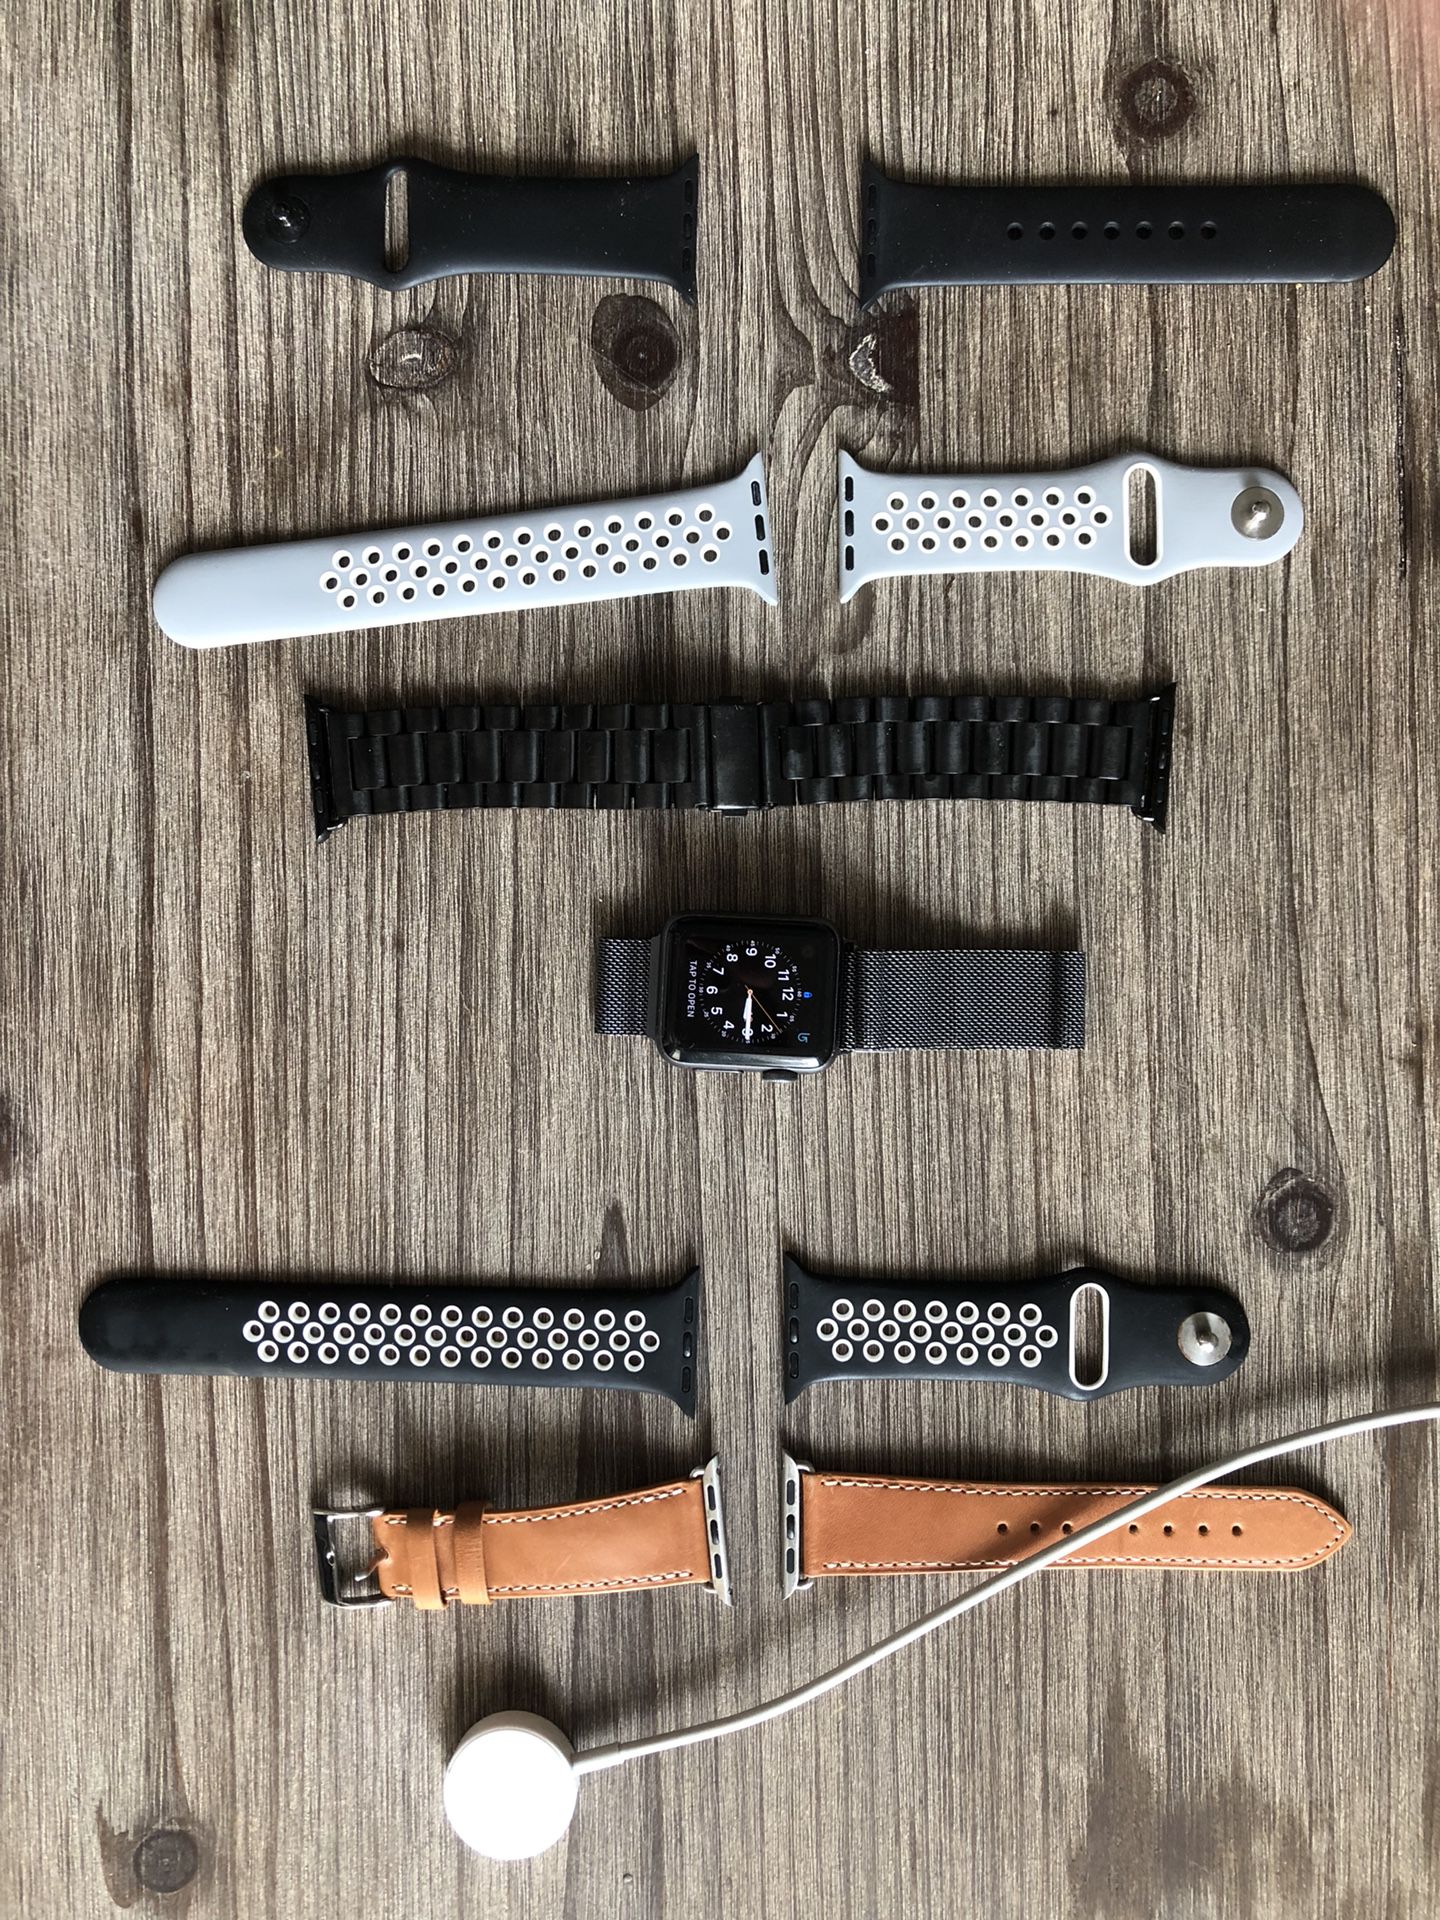 Series 2 Apple Watch 38mm & 6 Bands